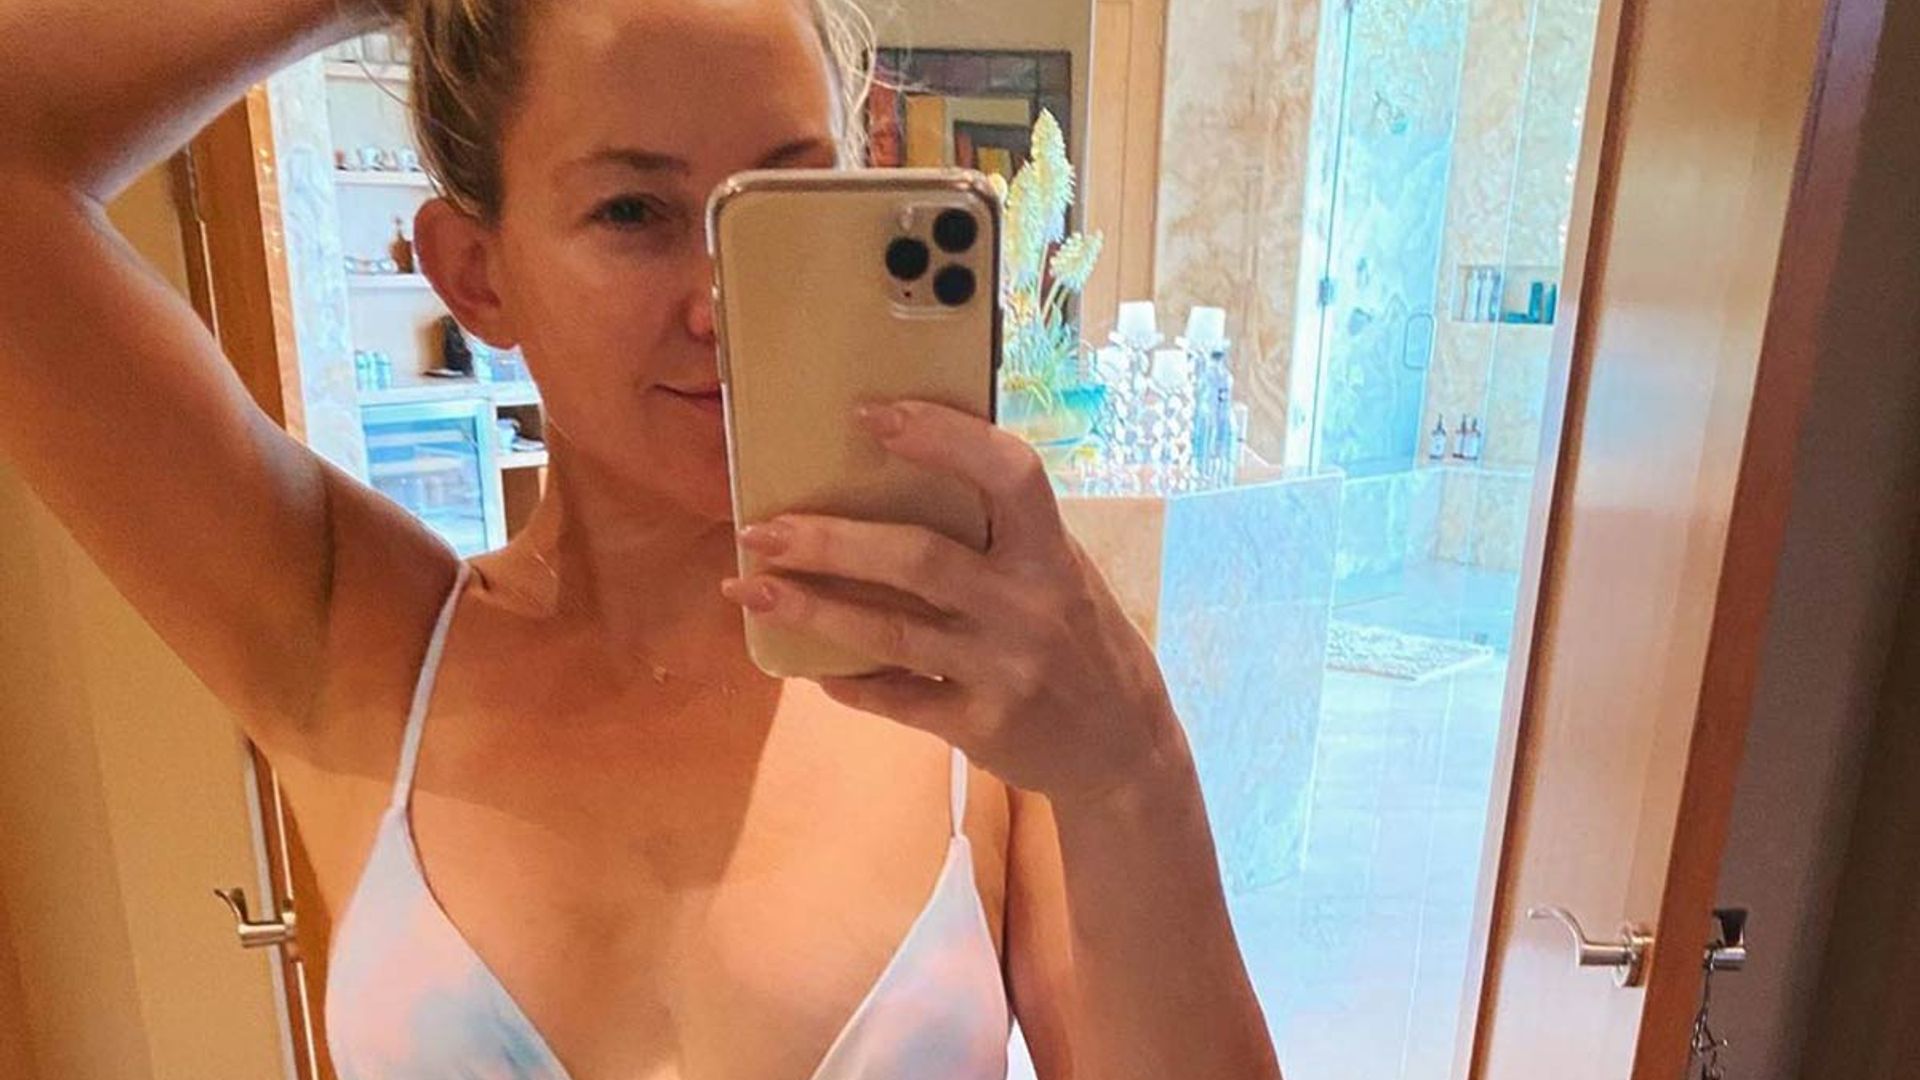 Kate Hudson Shares Workout Photos For Post-Baby Weightloss Plan